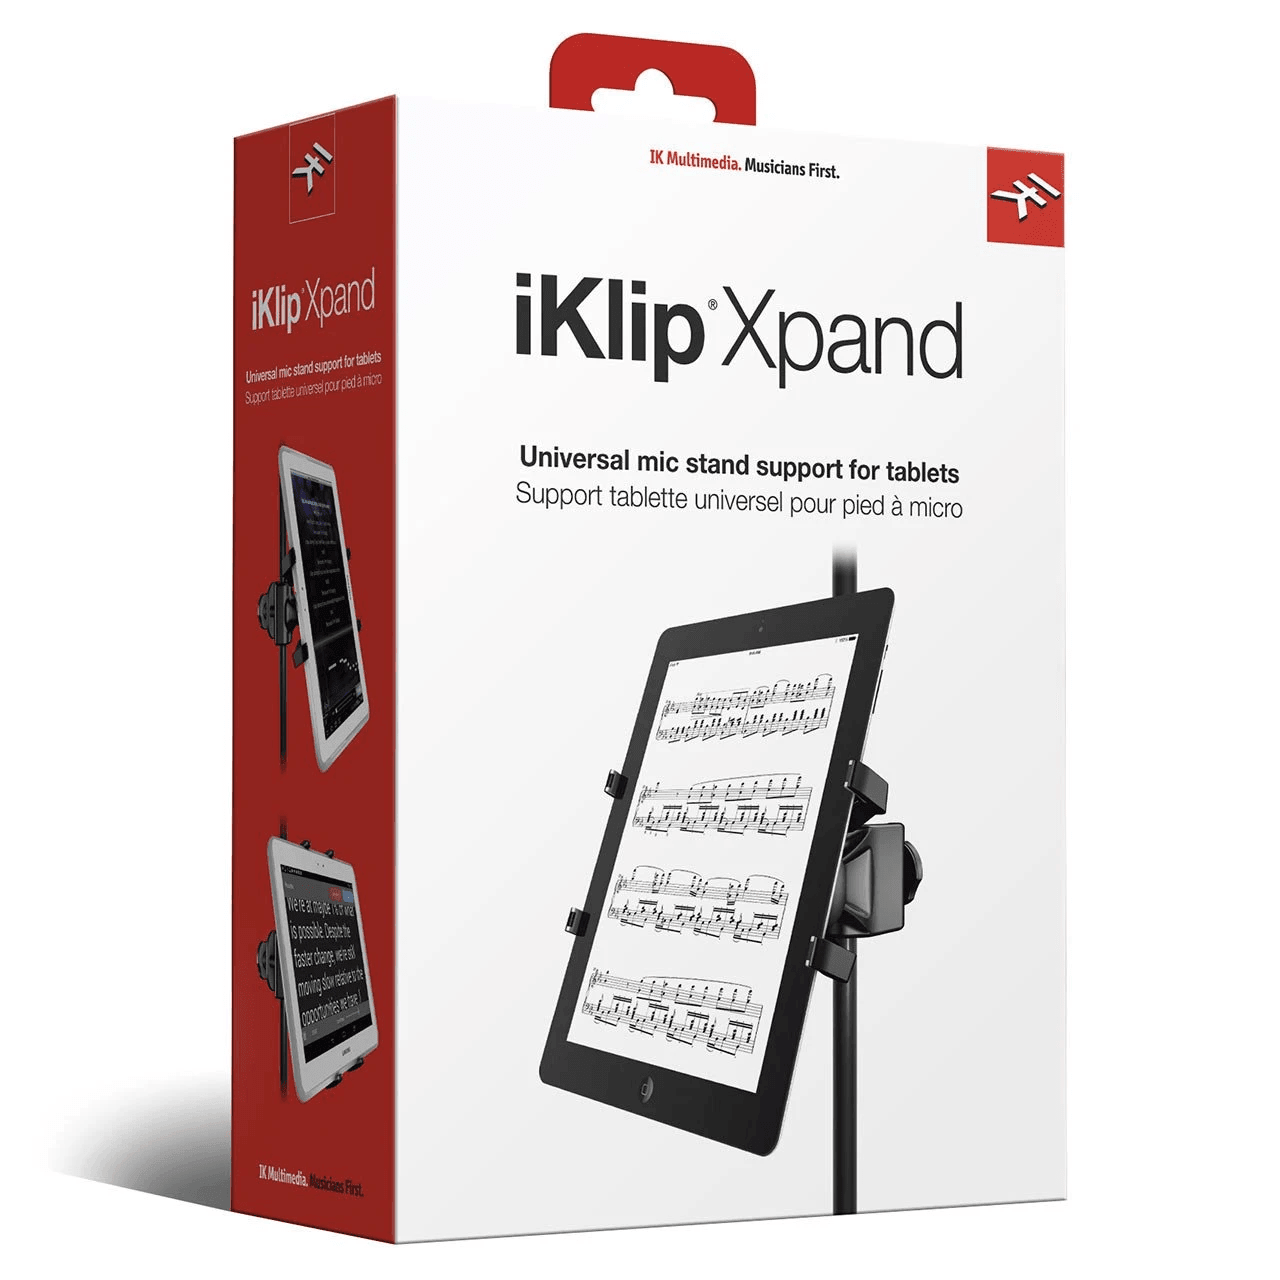 iKlip Xpand Universal Microphone Stand Mount For Tablet - Live & Recording - Accessories by IK Multimedia at Muso's Stuff